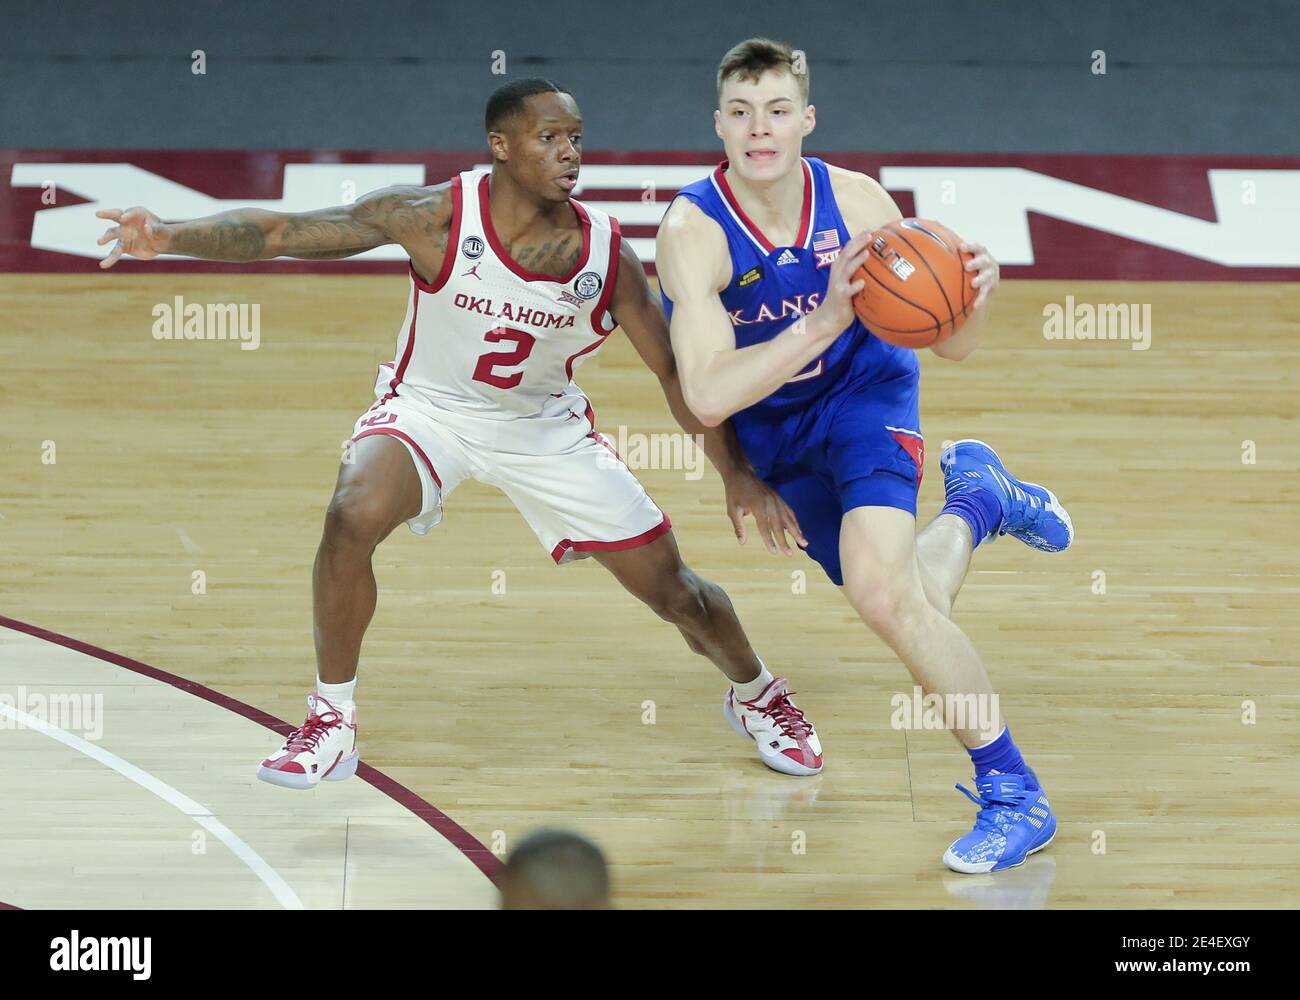 Norman, OK, USA. 23rd Jan, 2021. Kansas Jayhawks guard Christian Braun (2) is defended by Oklahoma Sooners guard Umoja Gibson (2) during a basketball game between the Kansas Jayhawks and Oklahoma Sooners at Lloyd Noble Center in Norman, OK. Gray Siegel/CSM/Alamy Live News Stock Photo